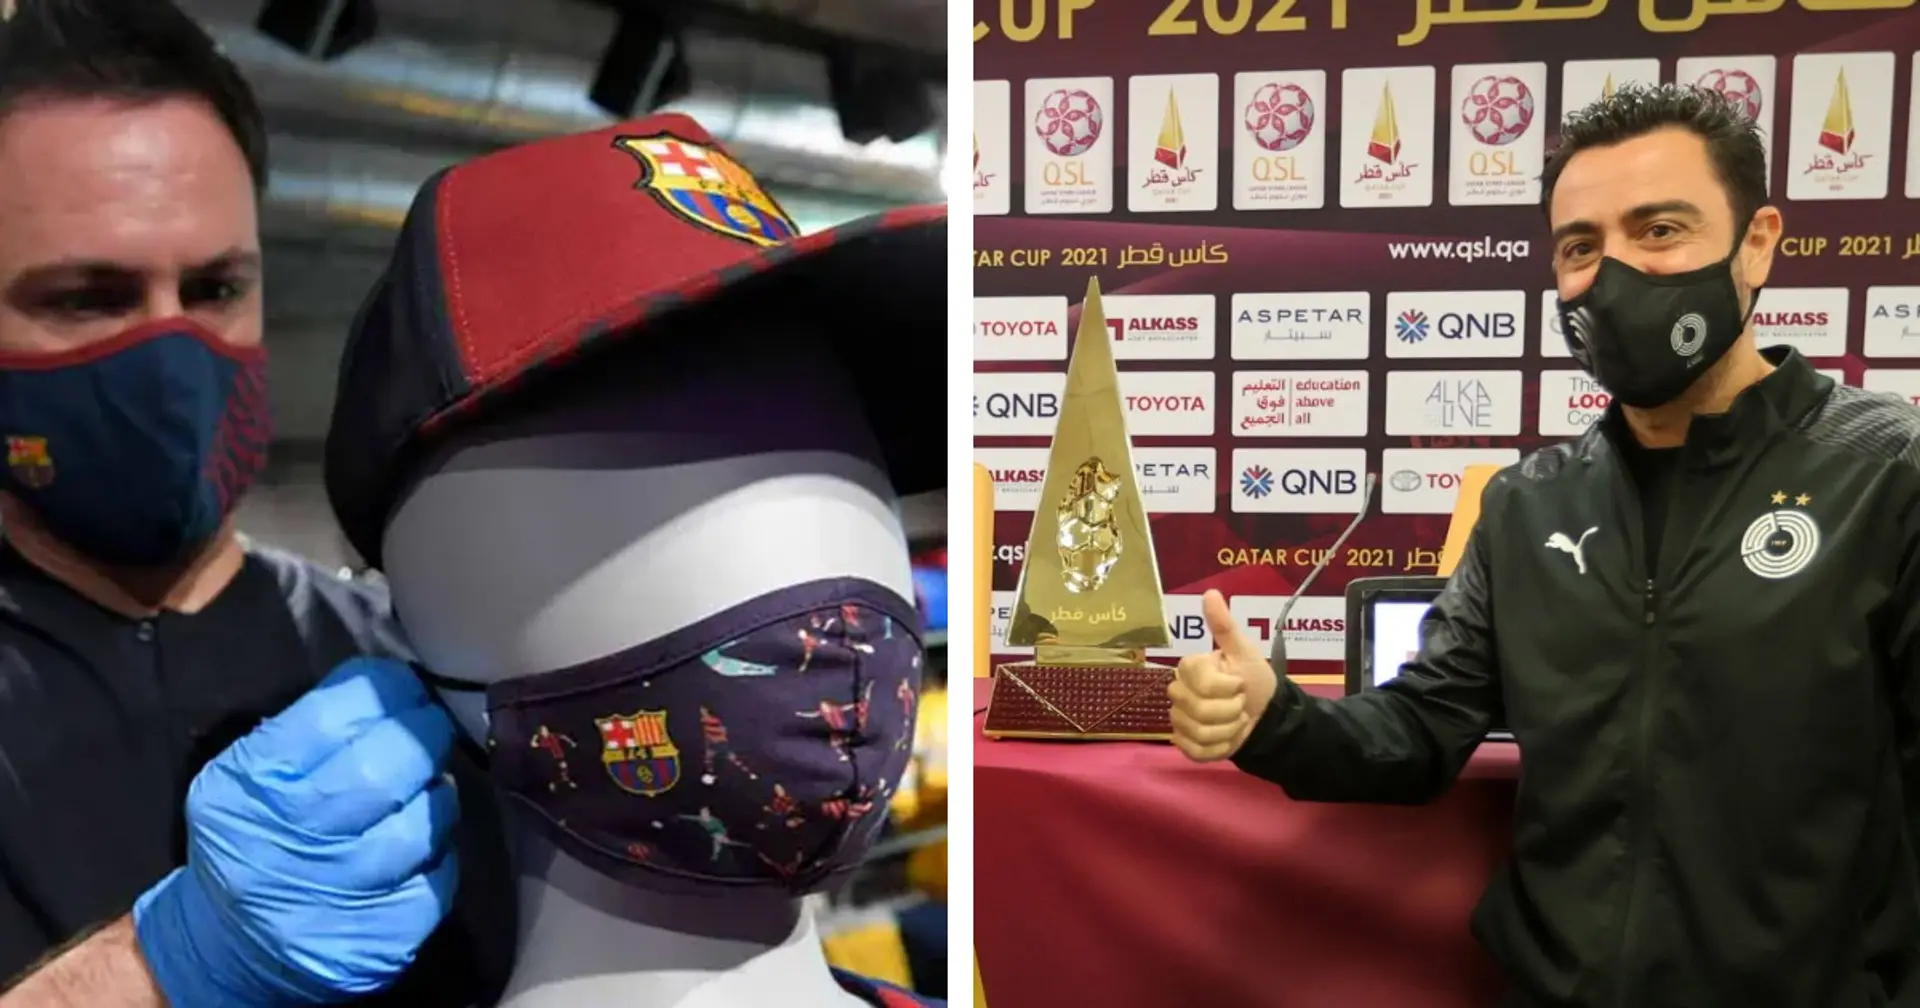 Xavi wins 5th trophy, Barca's covid masks most effective & more: 7 underrated stories of the week at Barca